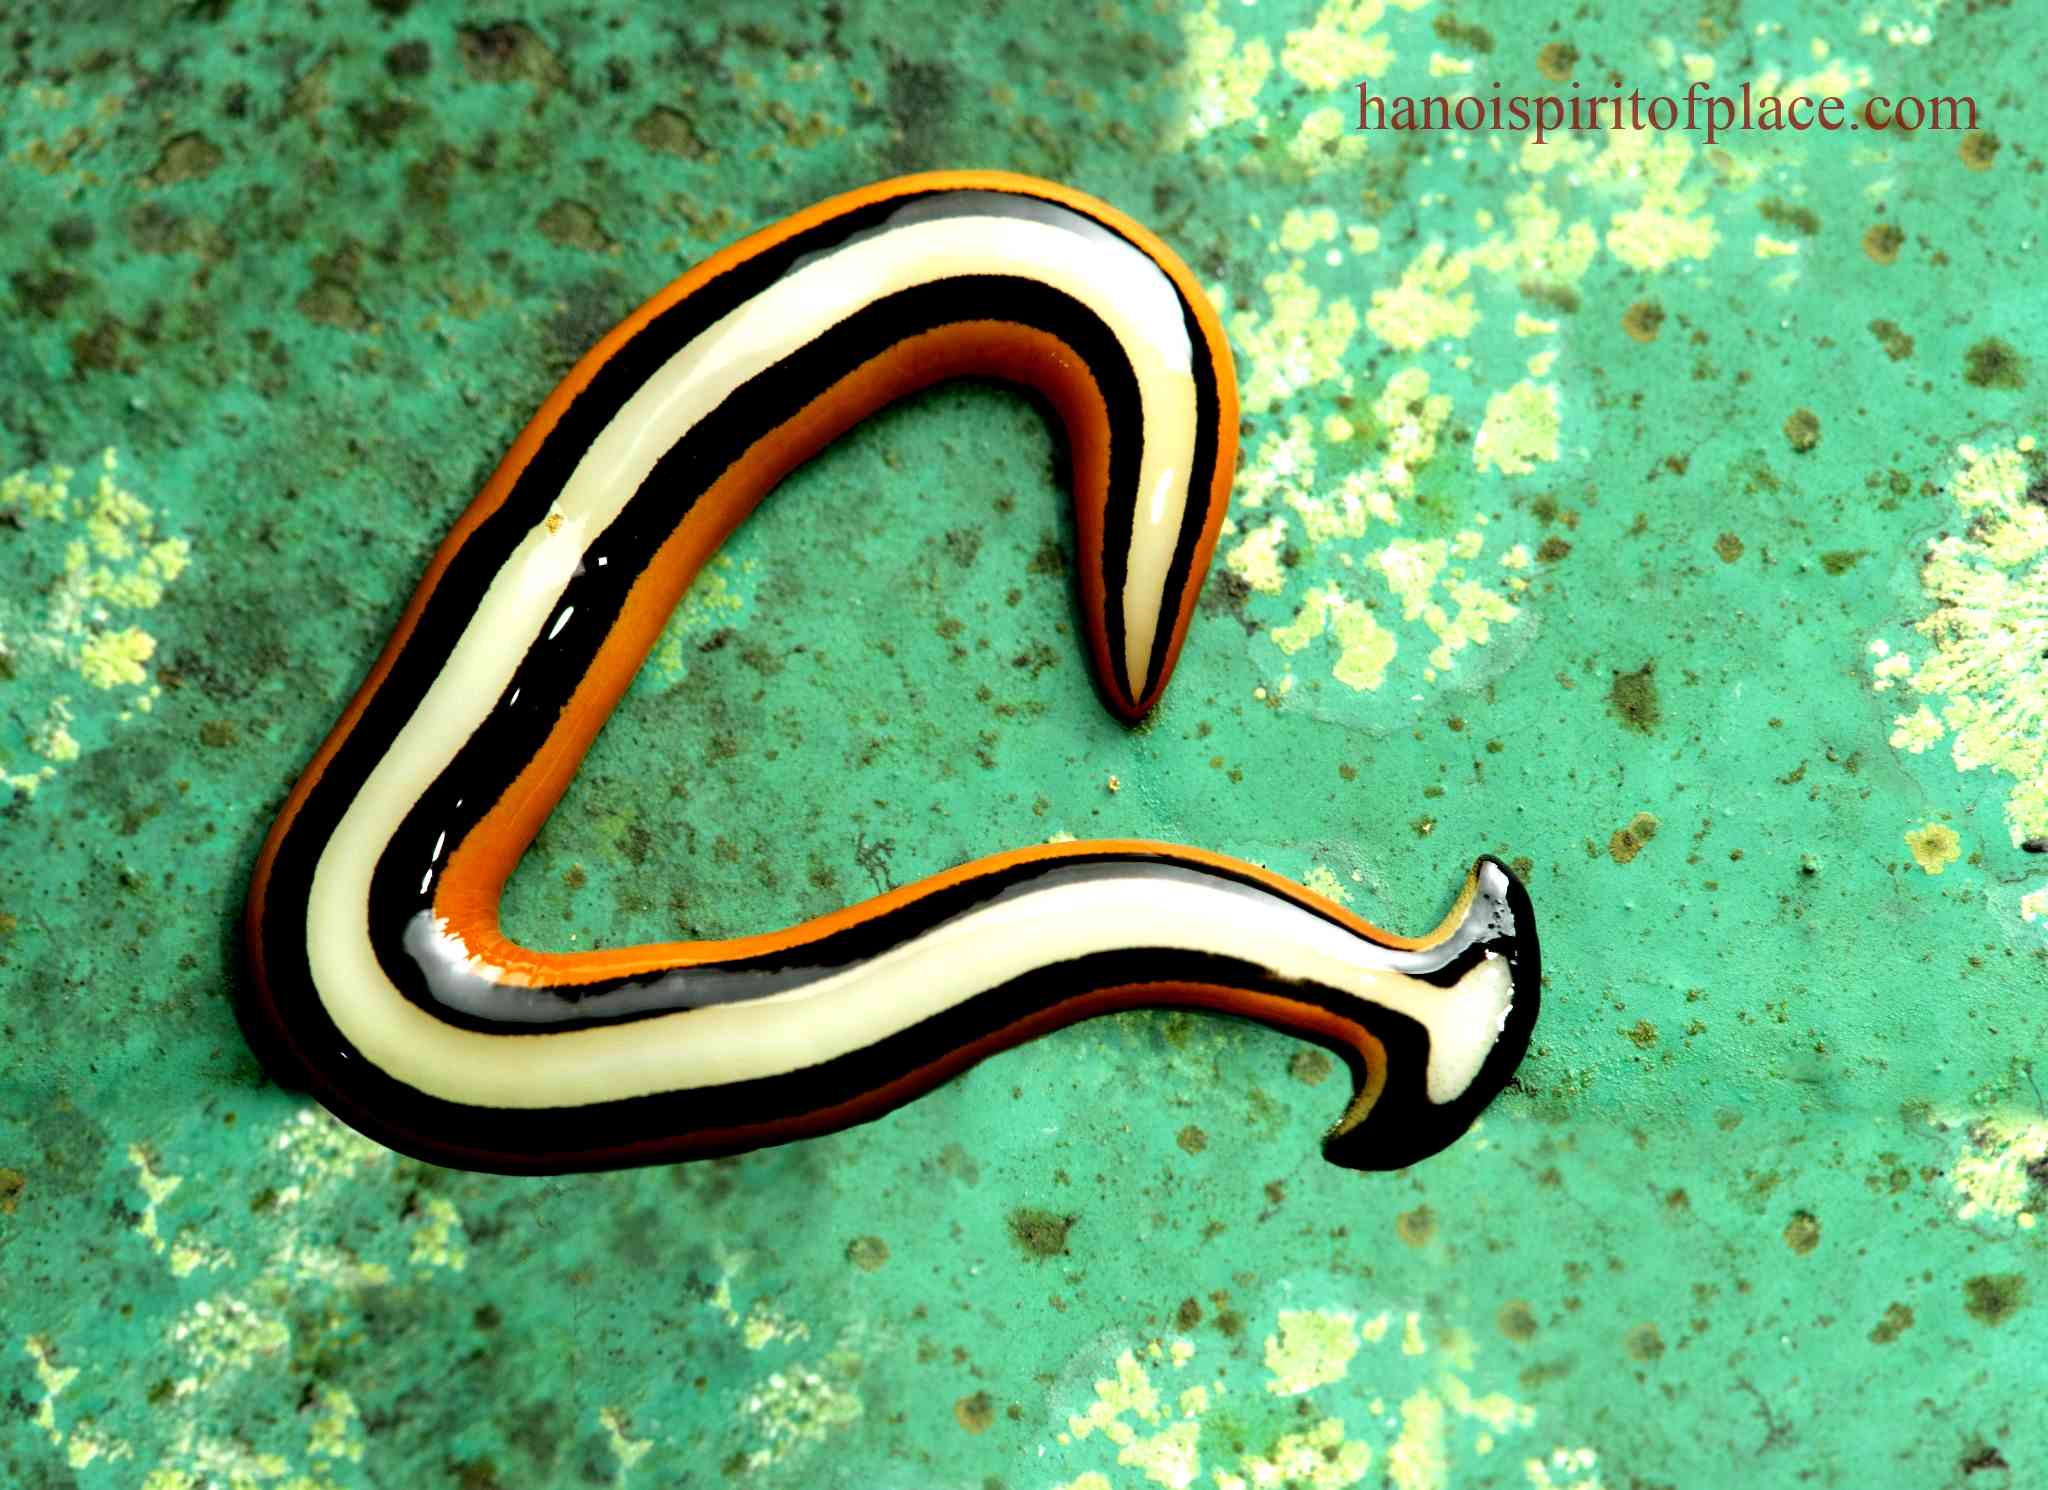 Ecological Impact of Hammerhead Worms